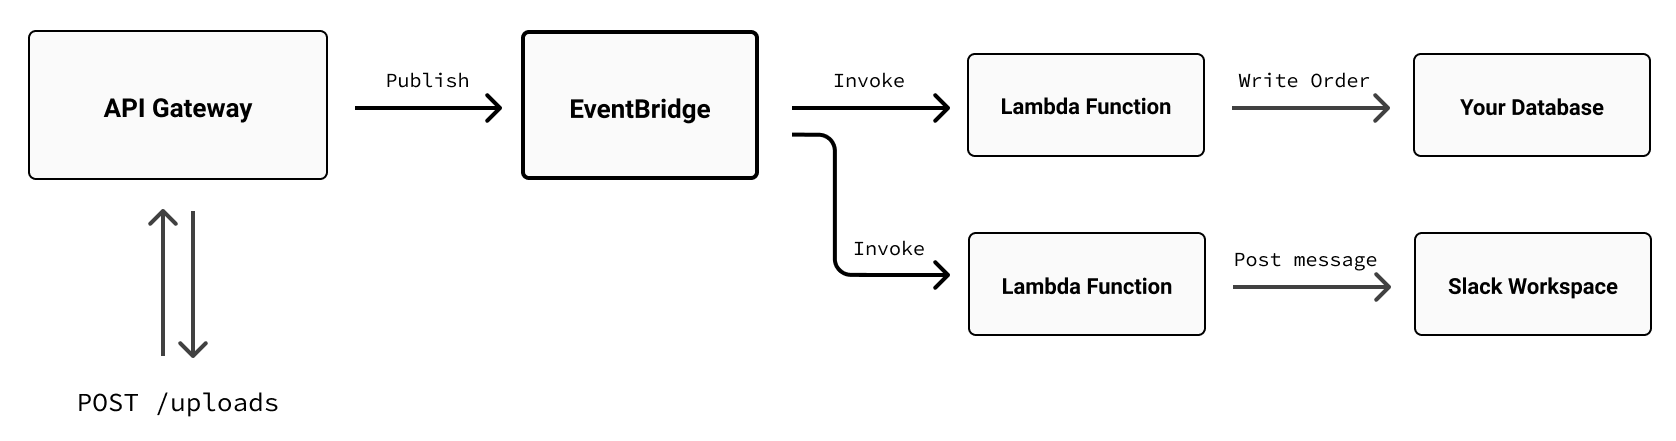 An expanded diagram showing API Gateway now publishing to EventBridge, with EventBridge invoking two separate Lambda functions: one writing an order to a database, the other posting a message to Slack.